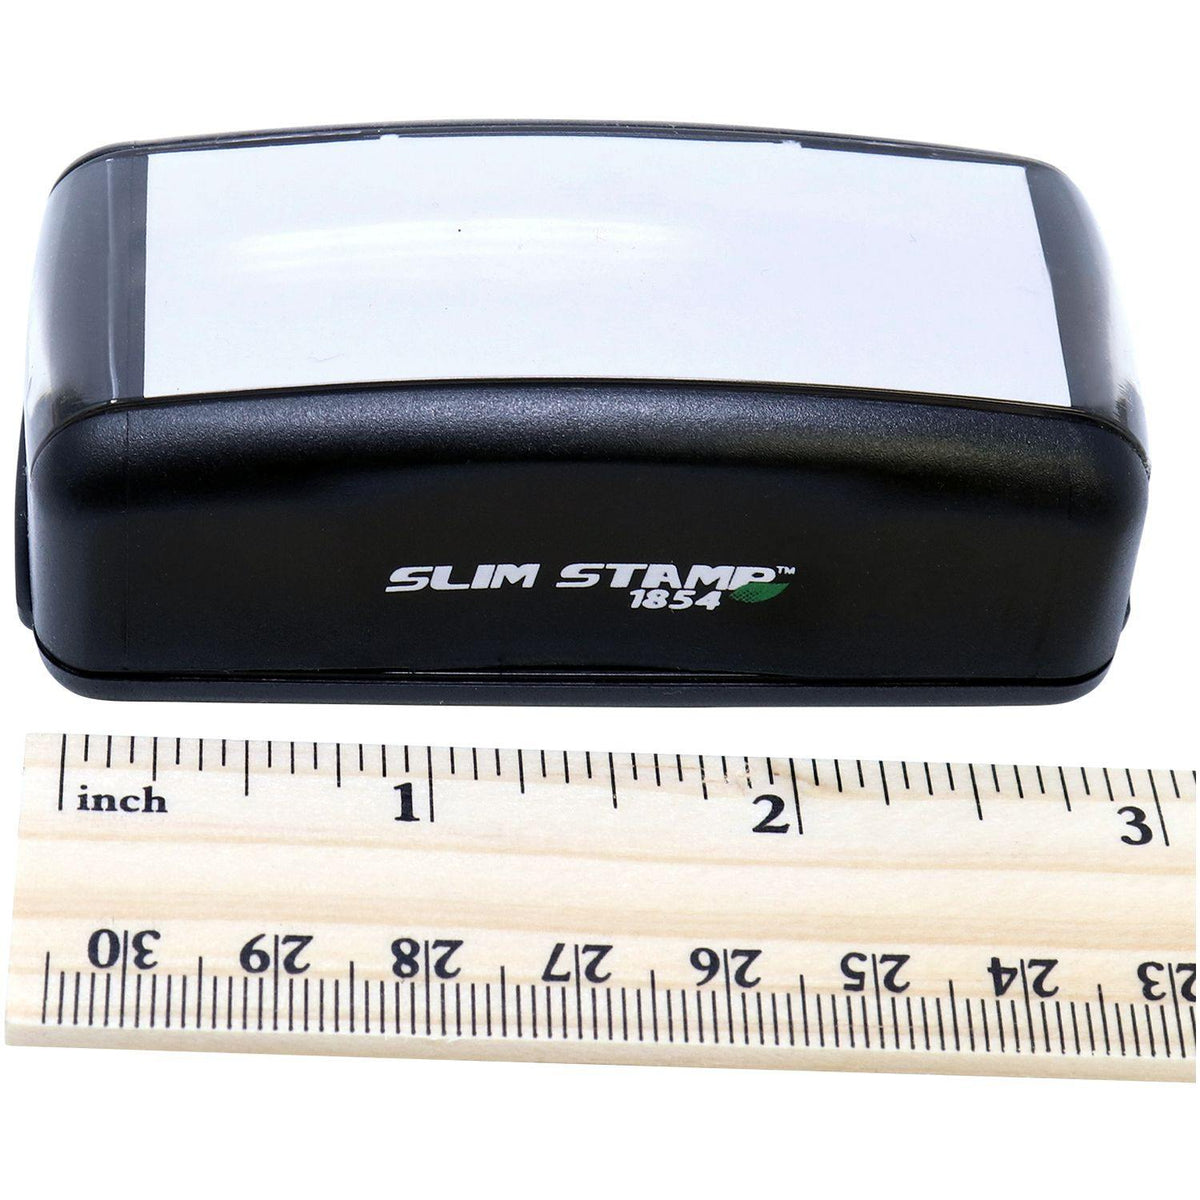 Measurement Large Pre Inked Fyi Stamp with Ruler